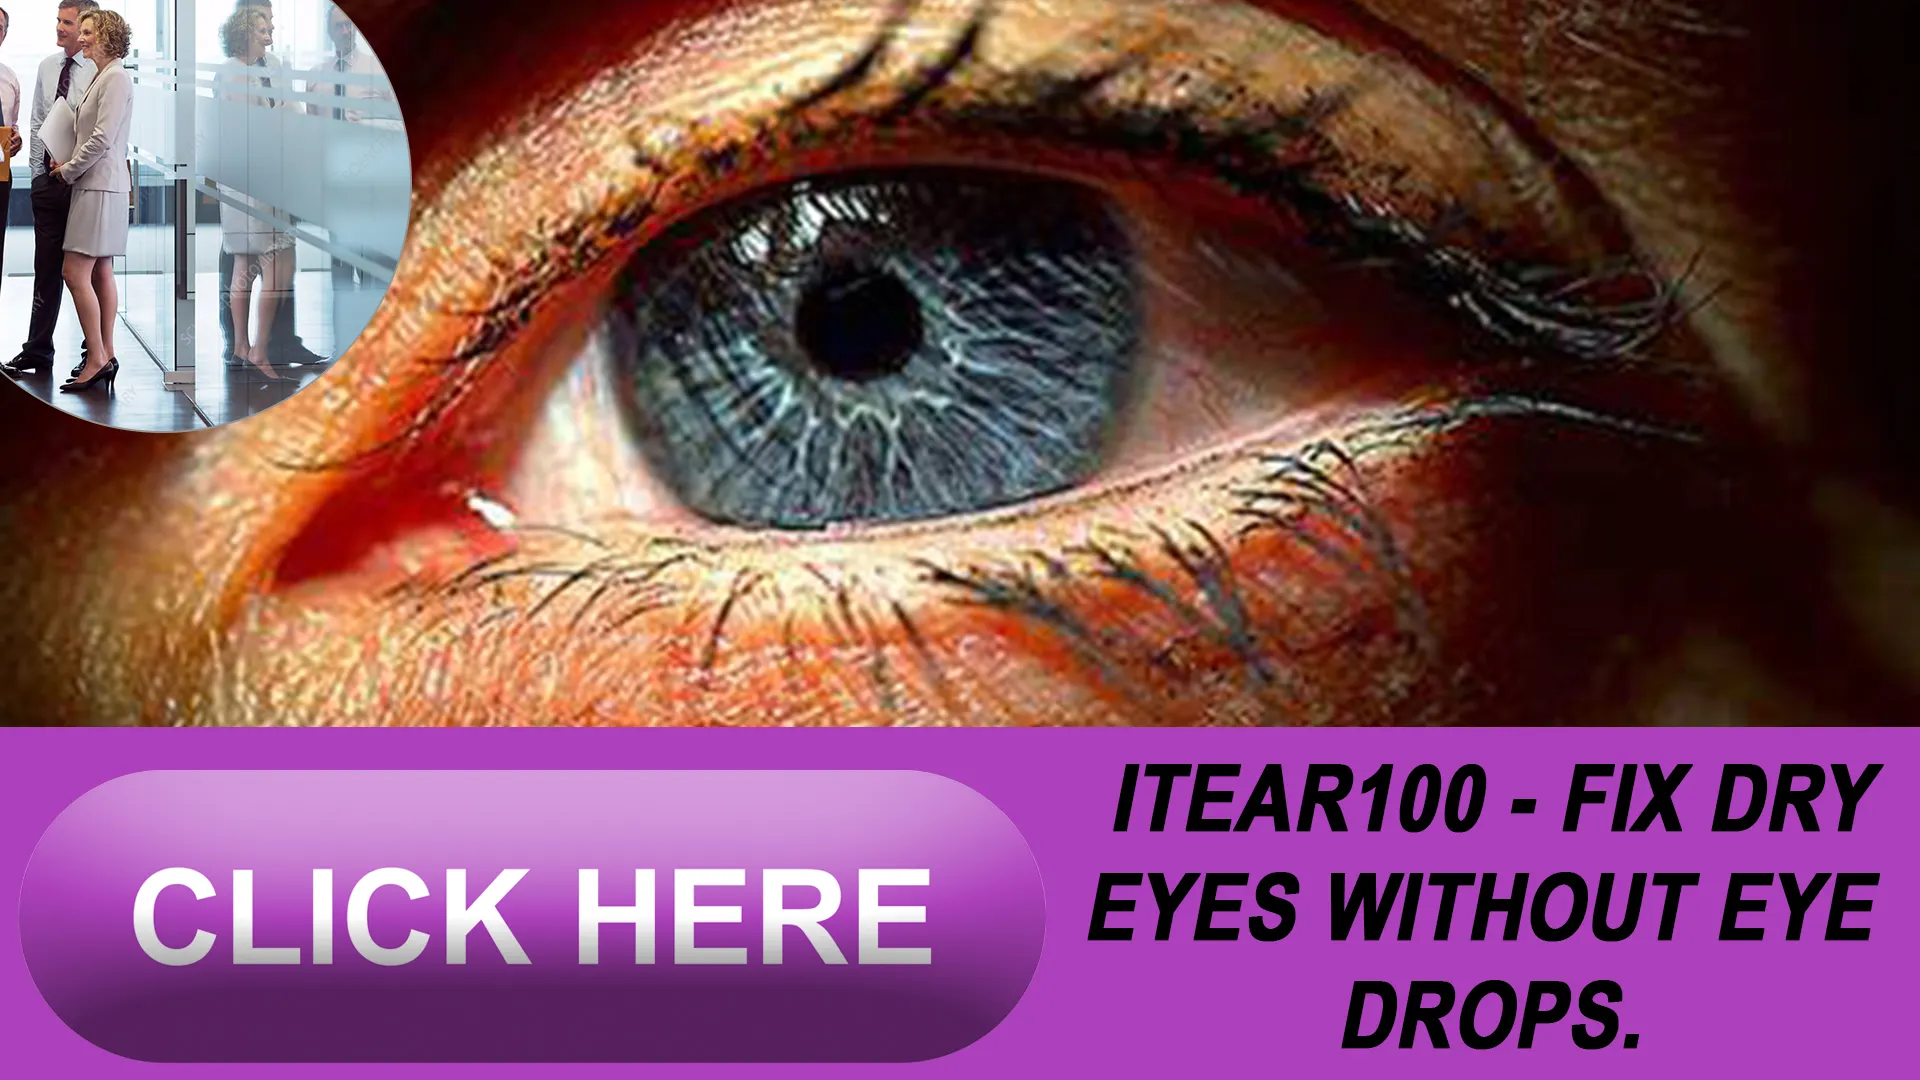 Tackling Dry Eye Syndrome with Revolutionary Technology